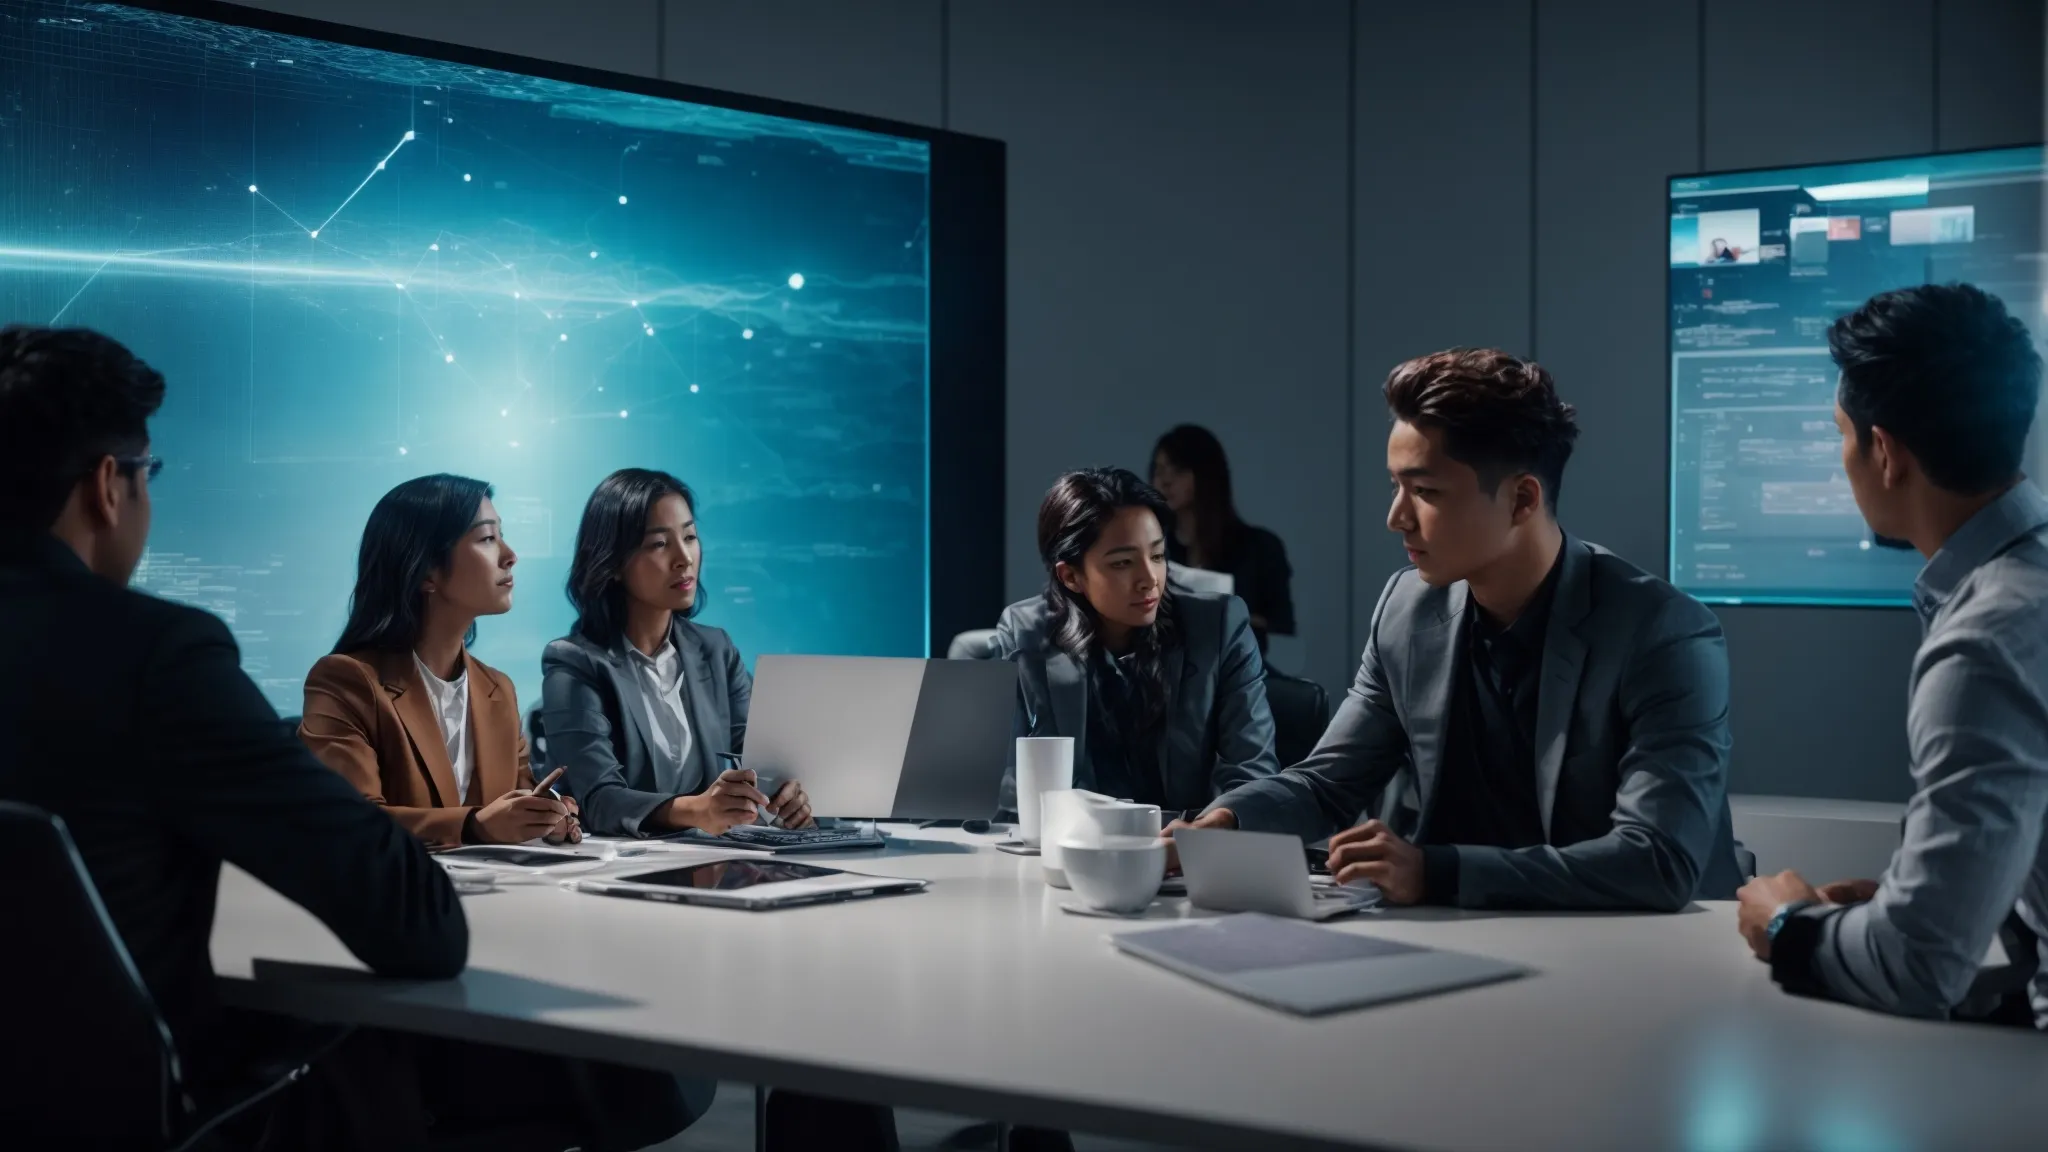 a brainstorming session with creative professionals surrounding a futuristic holographic display of a marketing campaign.